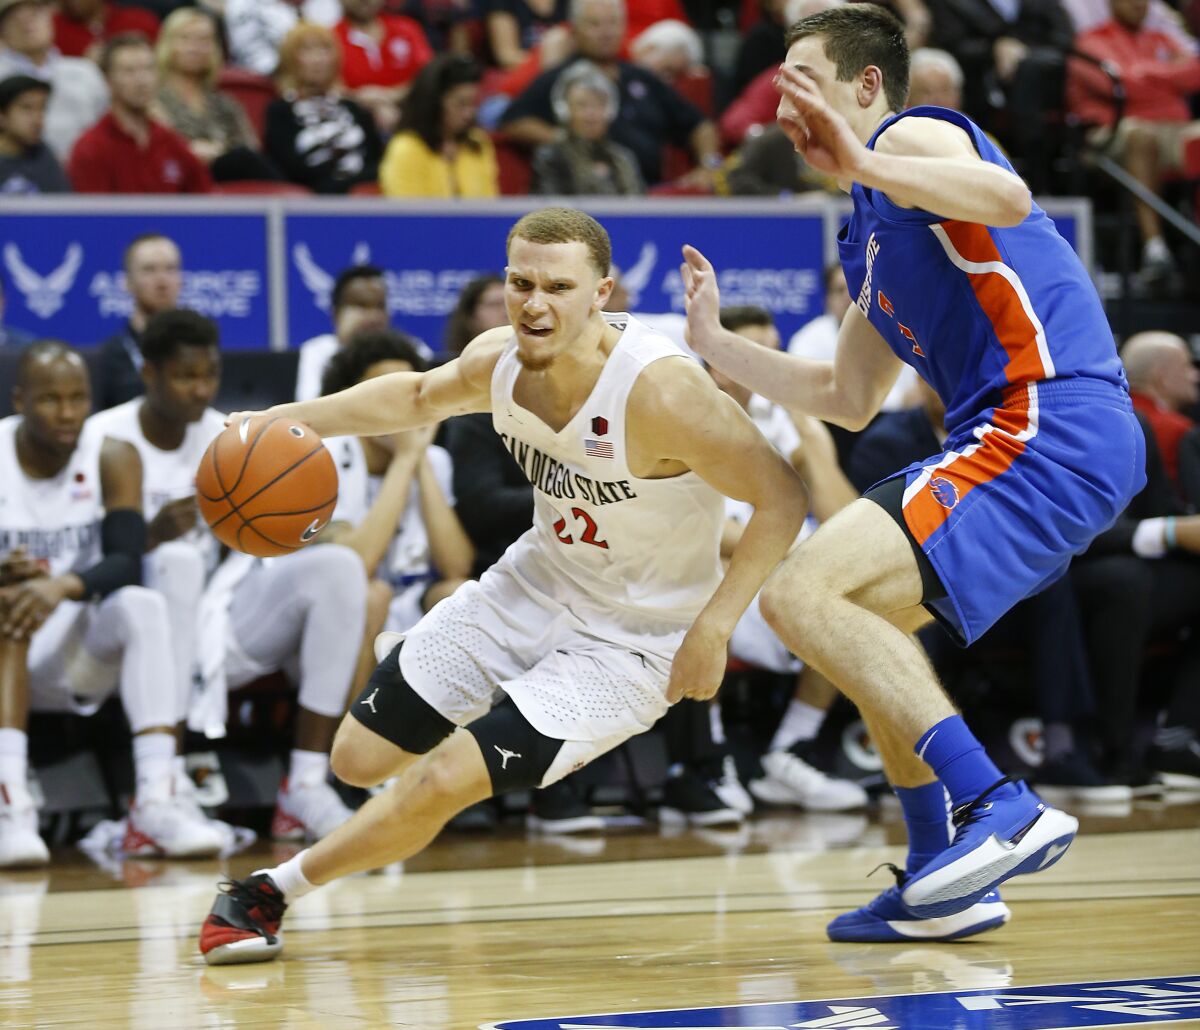 San Diego State's Malachi Flynn drives against Boise State during the Mountain West Conference tournament in Las Vegas on March 6, 2020.